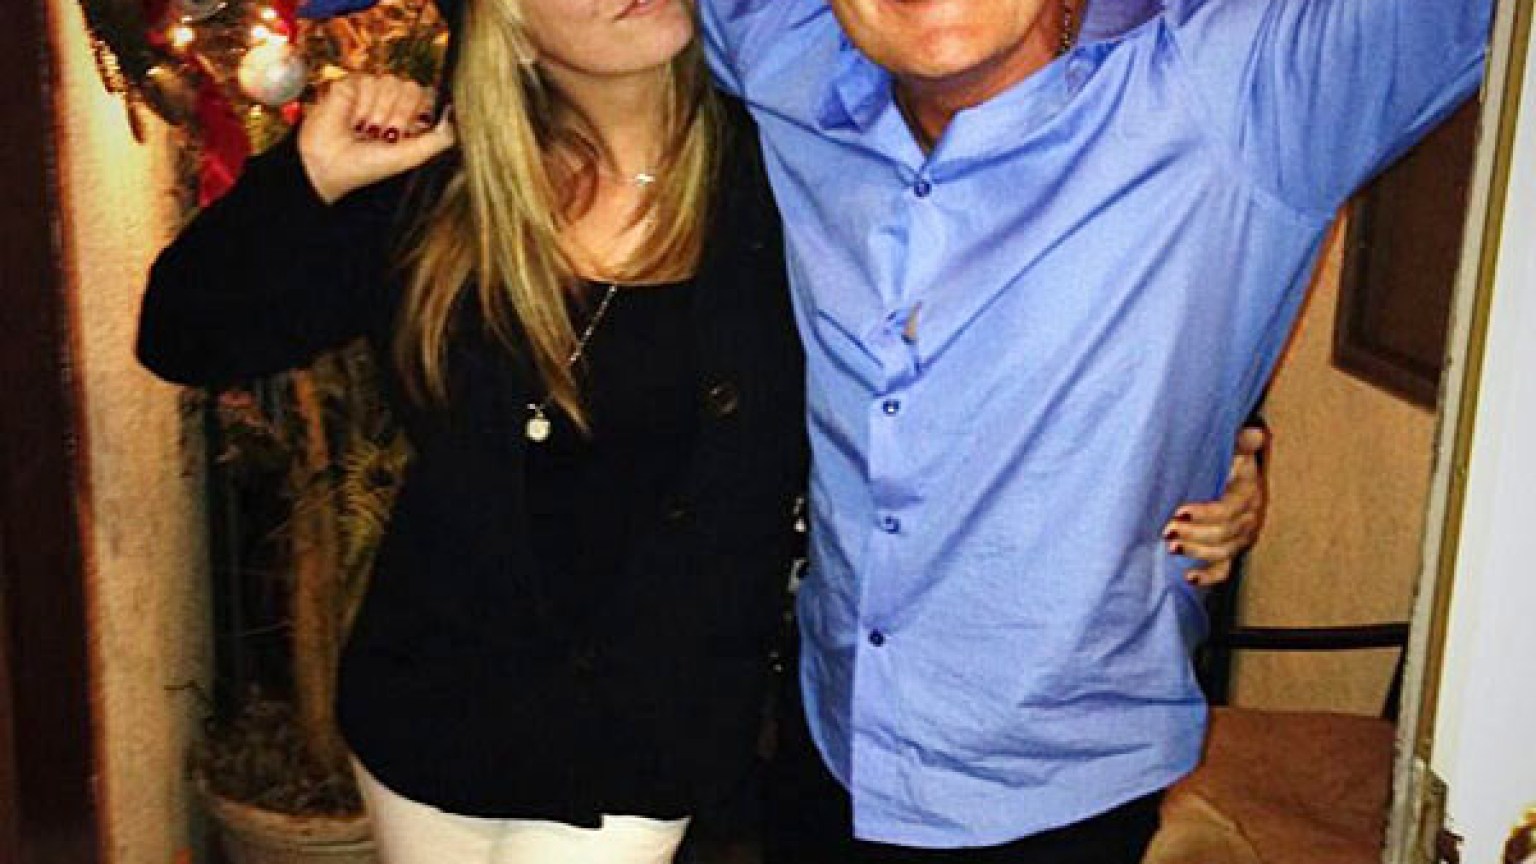 Is Charlie Sheen�s Fiancee Married Already? � Brett Rossi Hiding Big ... picture